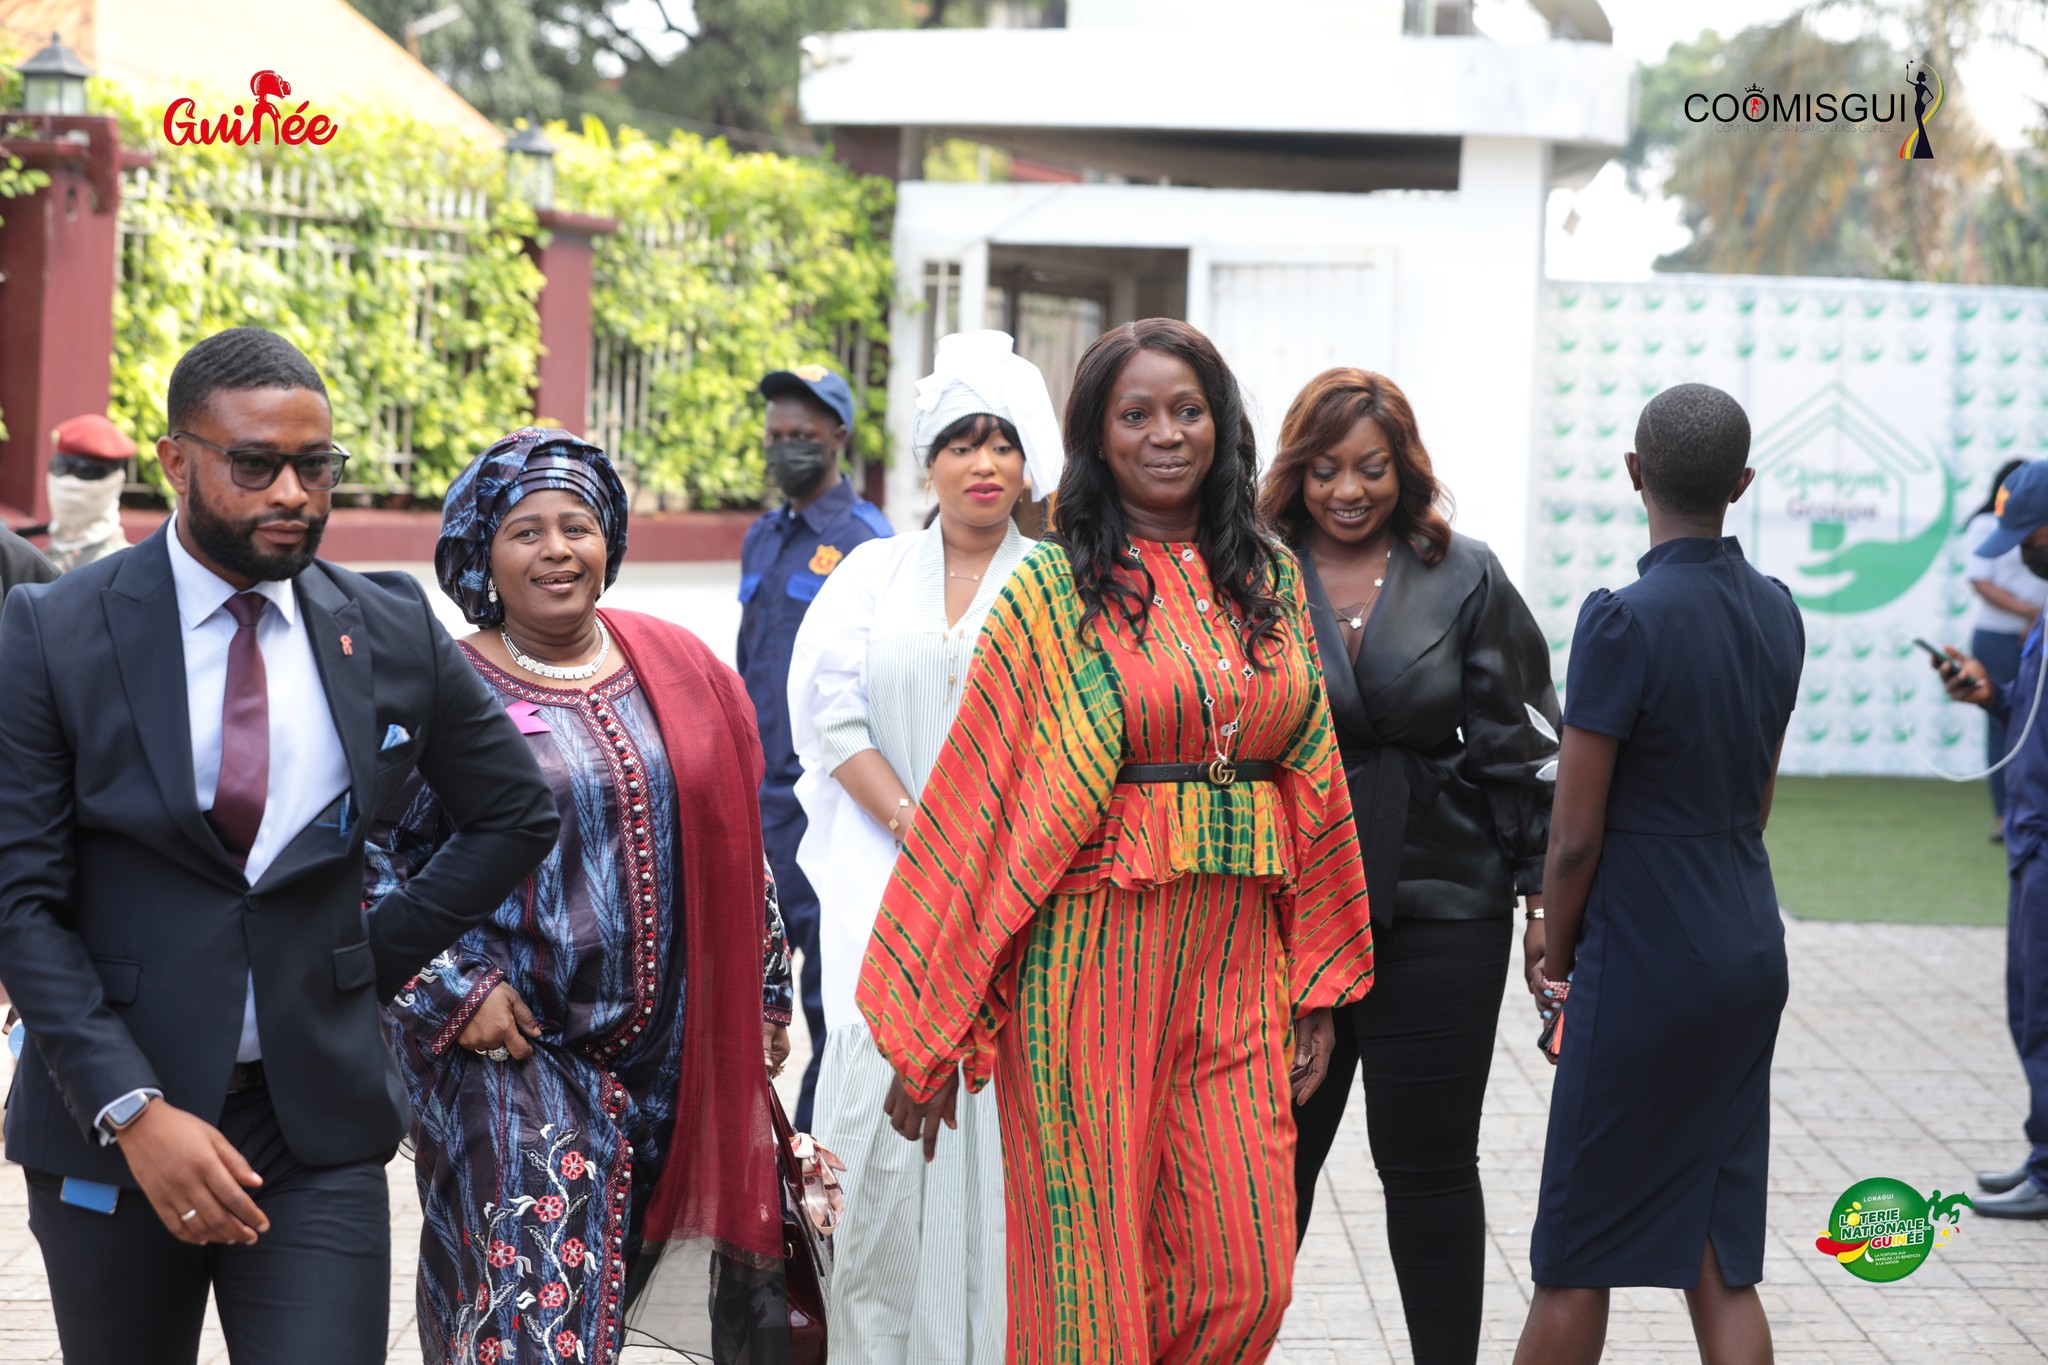 COOMISGUI 2023 by Aminata DIALLO - Visit the Candidates Residence Miss GUINEE 2023  - A very  Warm Welcoming for Madame Lauriane Doumbouya, the First Lady of the Guinee Republic & Madame Aicha Nanette Conté, Aicha Nanette Conté